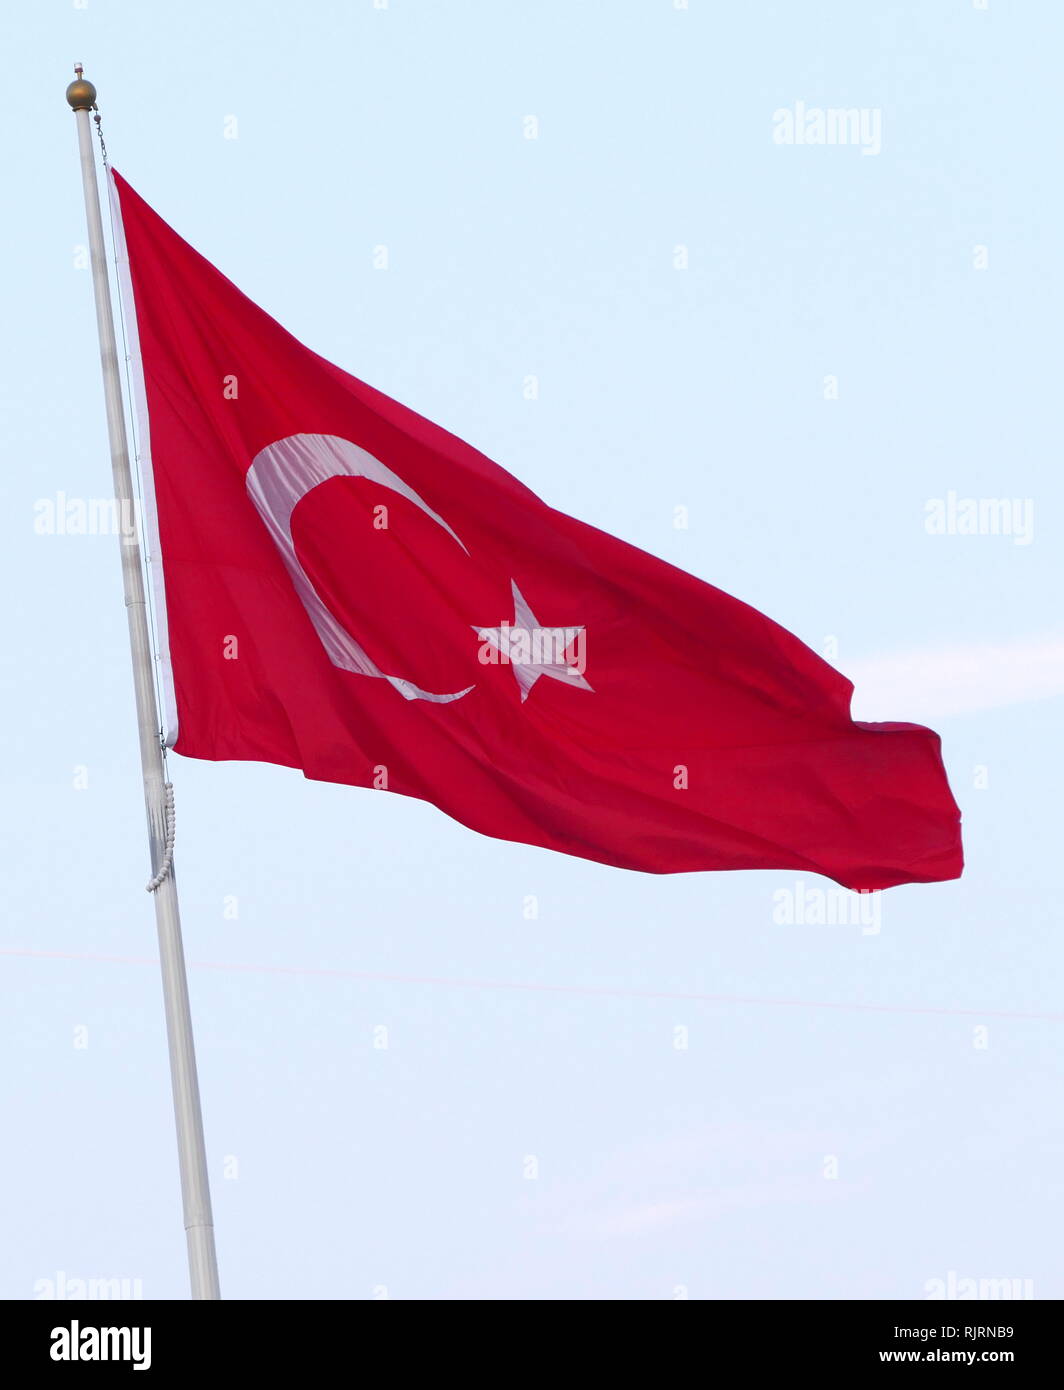 The flag of the Republic of Turkey, is a red flag featuring a white star and crescent. The flag is often called al bayrak (the red flag), and is referred to as al sancak (the red banner) in the Turkish national anthem. The current design of the Turkish flag is directly derived from the late Ottoman flag, which had been adopted in the late 18th century and acquired its final form in 1844. Stock Photo